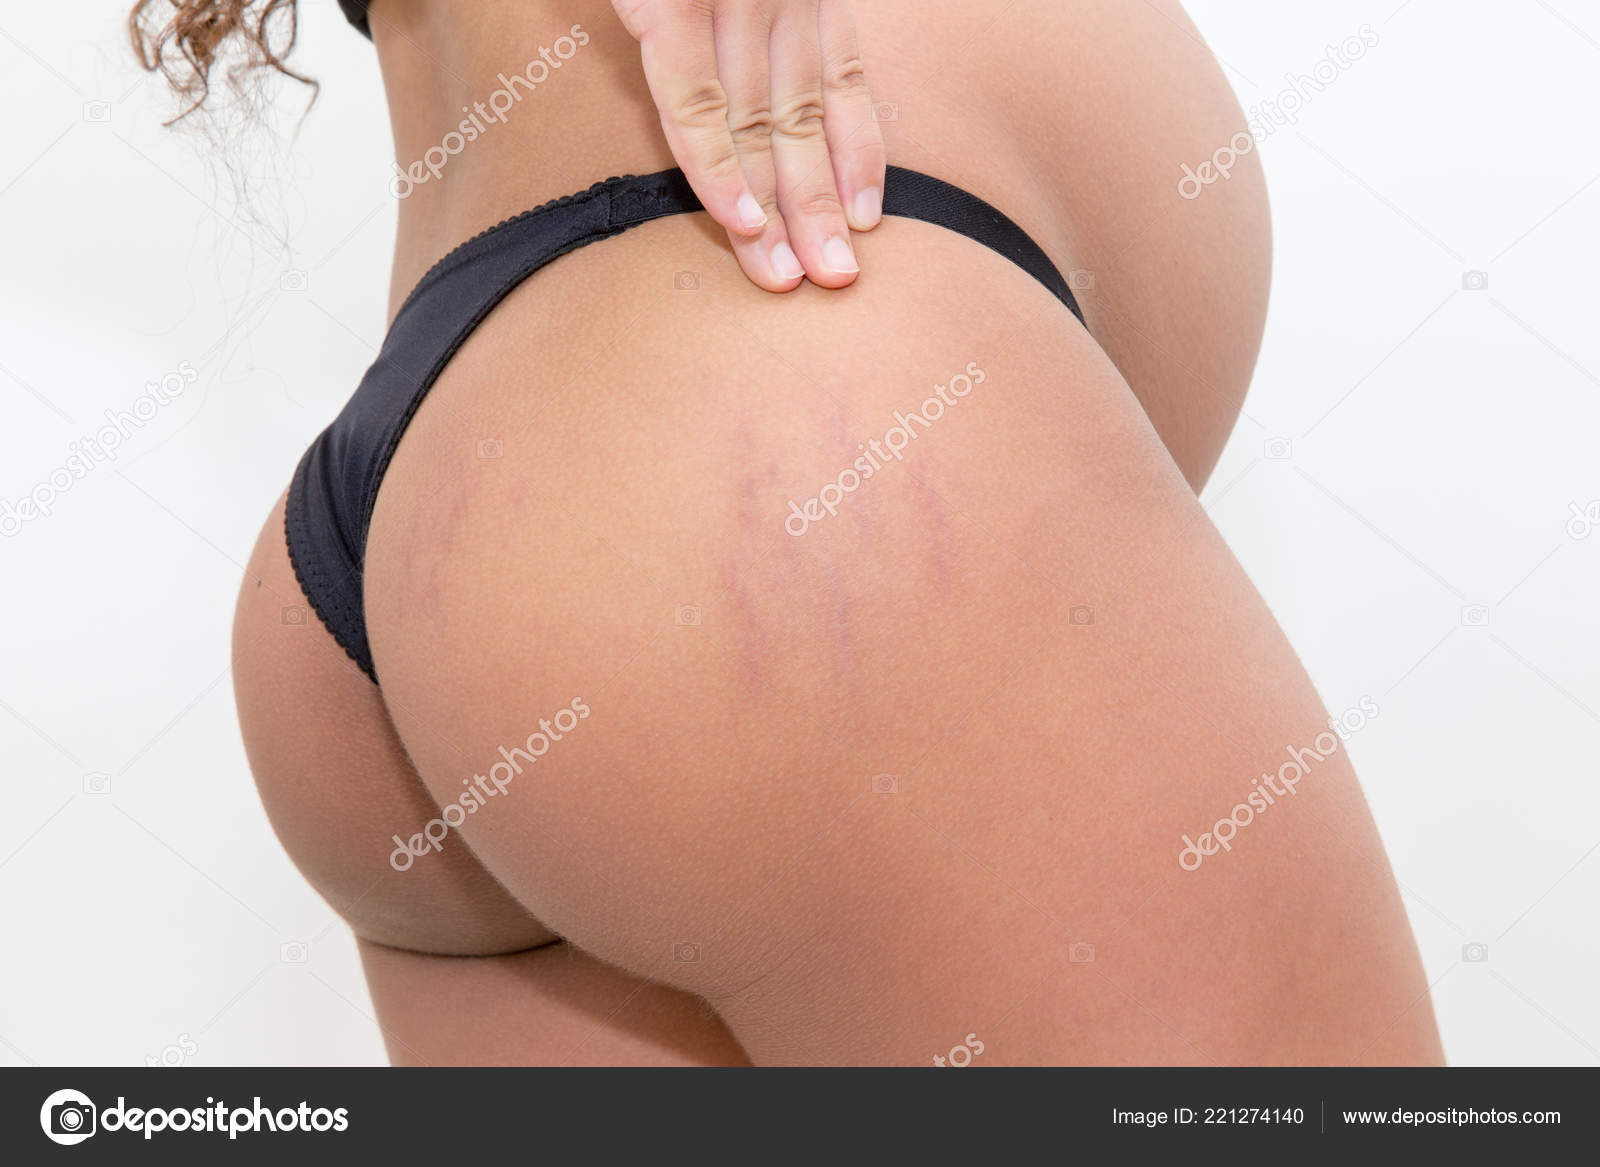 Download - Closeup of a pregnant woman with stretch marks on the buttocks. 